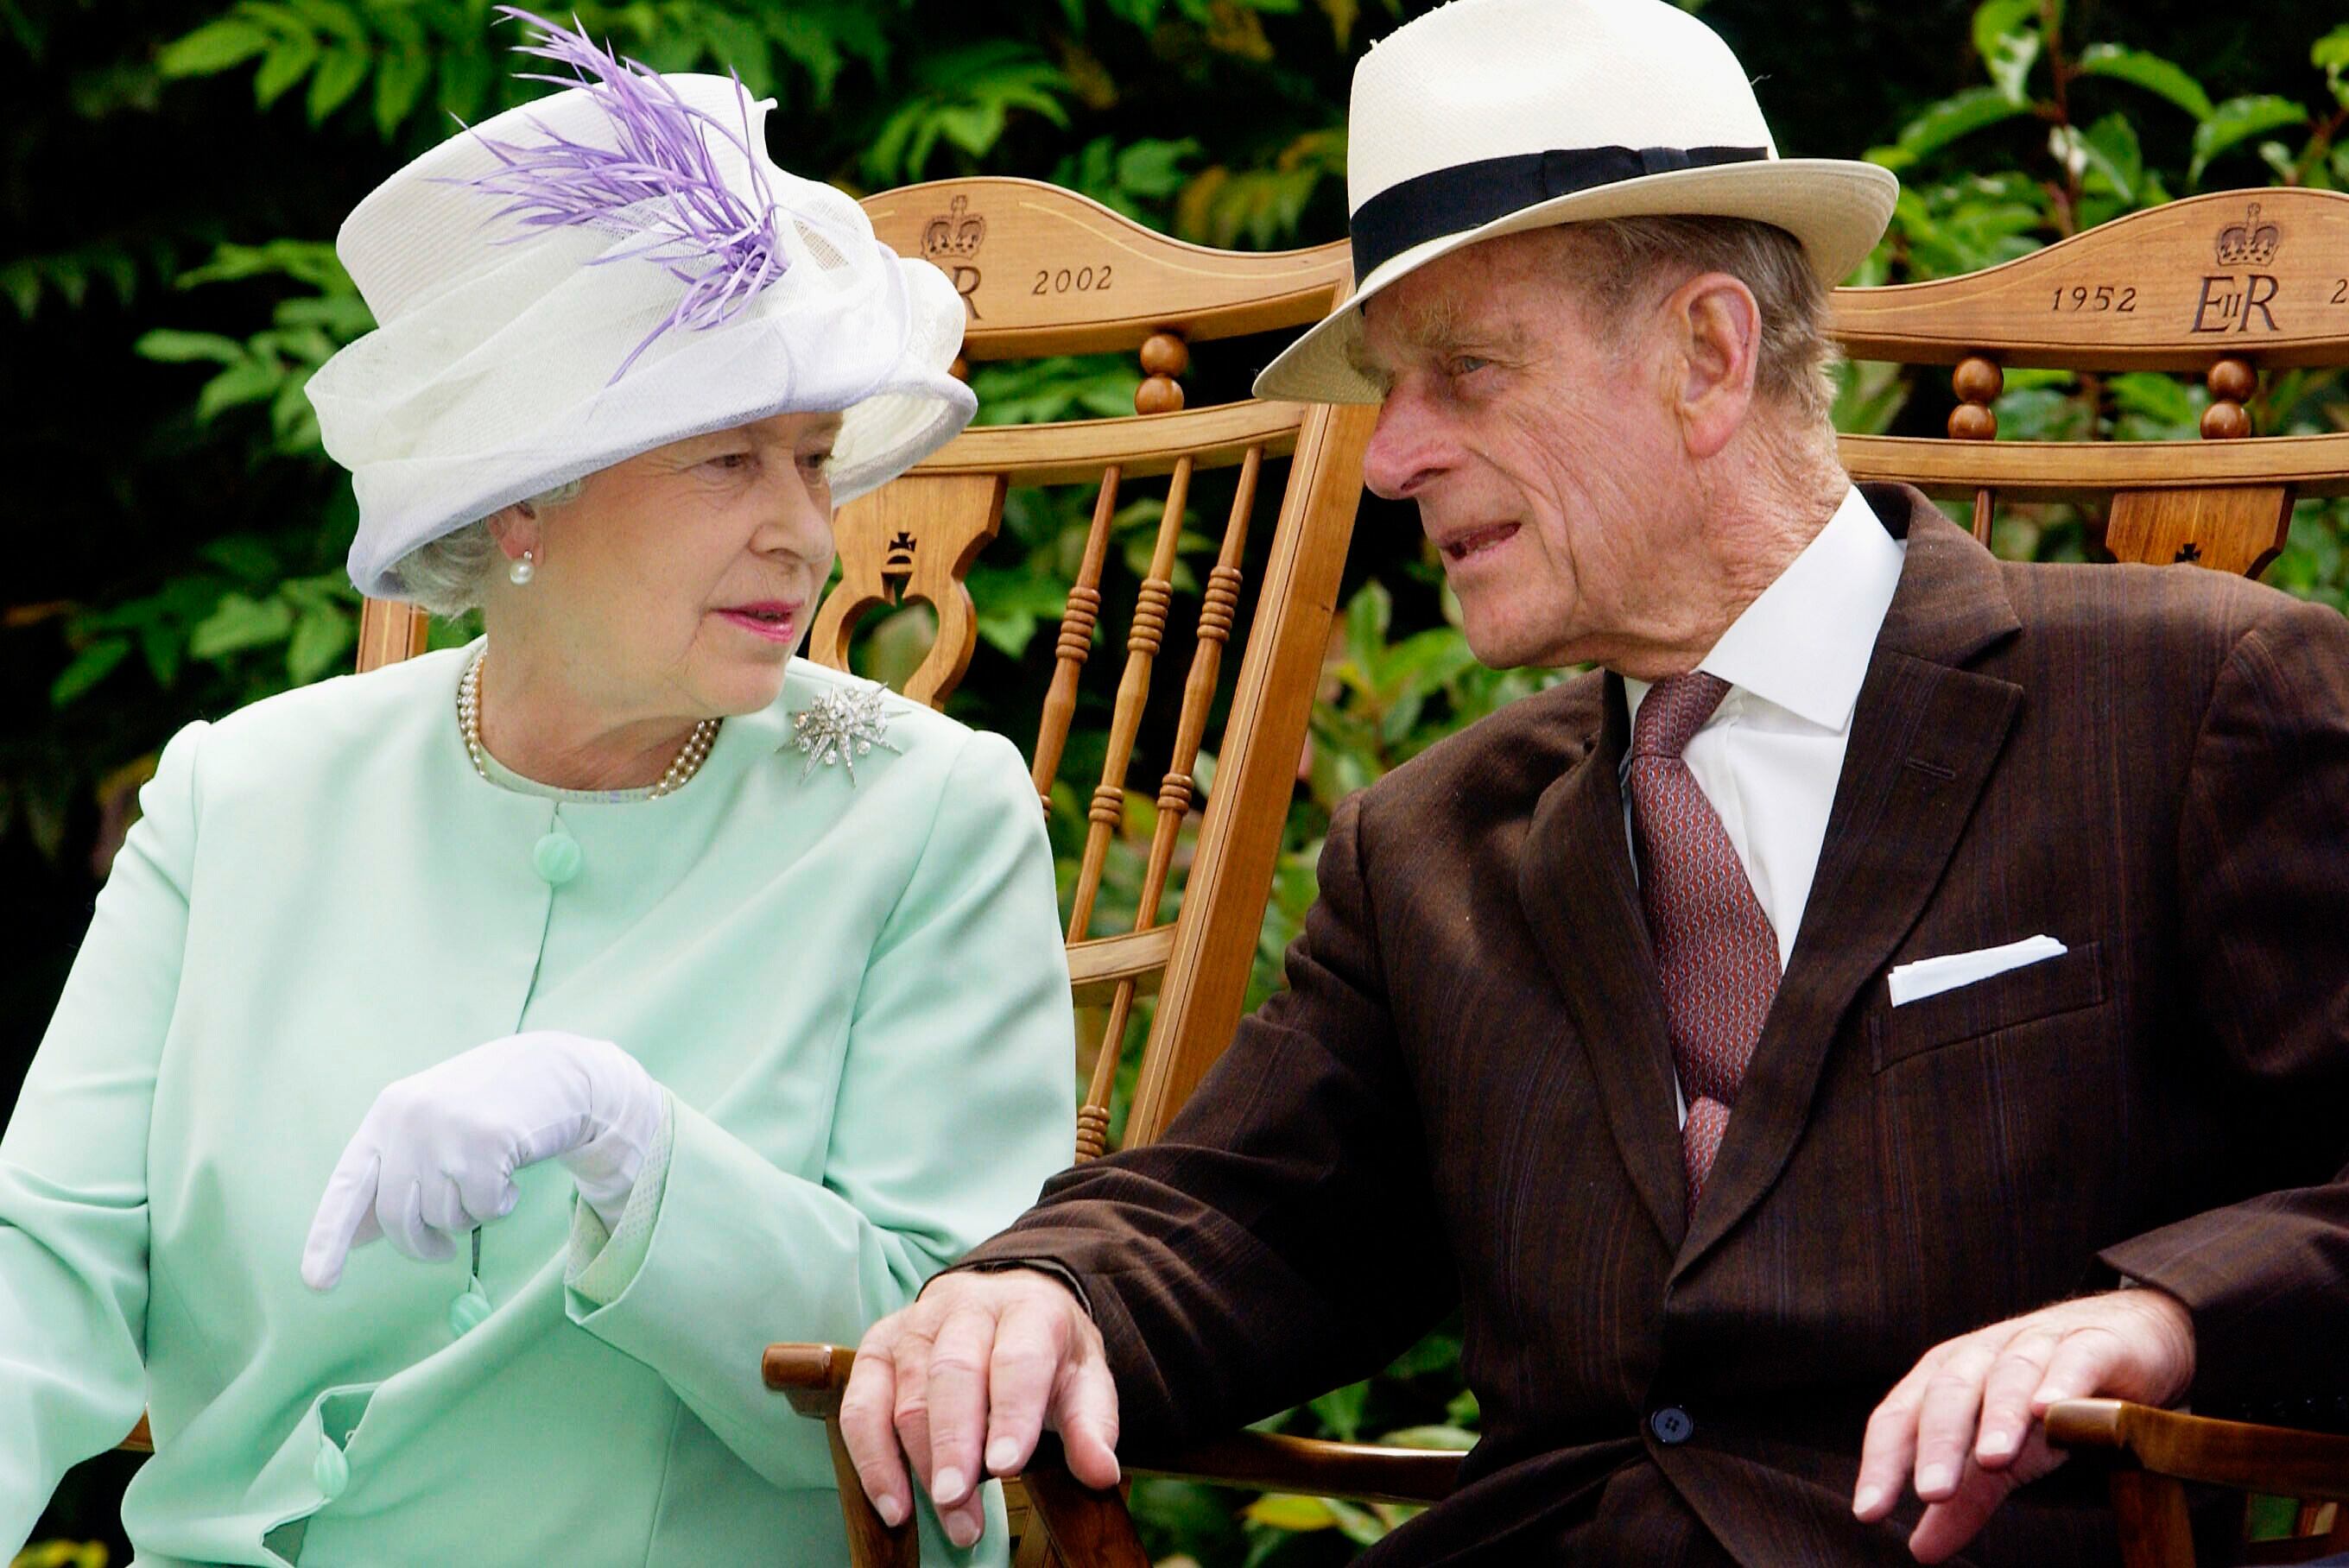 BURY ST EDMUNDS;UNITED KINGDOM - JULY 18: Queen Elizabeth II and Prince Phillip the Duke of Edinburgh chat while seated during a musical performance in the Abbey Gardens, Bury St Edmunds during her Golden Jubilee visit to Suffolk on the 18th of July 2002.(Photo by Anwar Hussein/Getty Images)